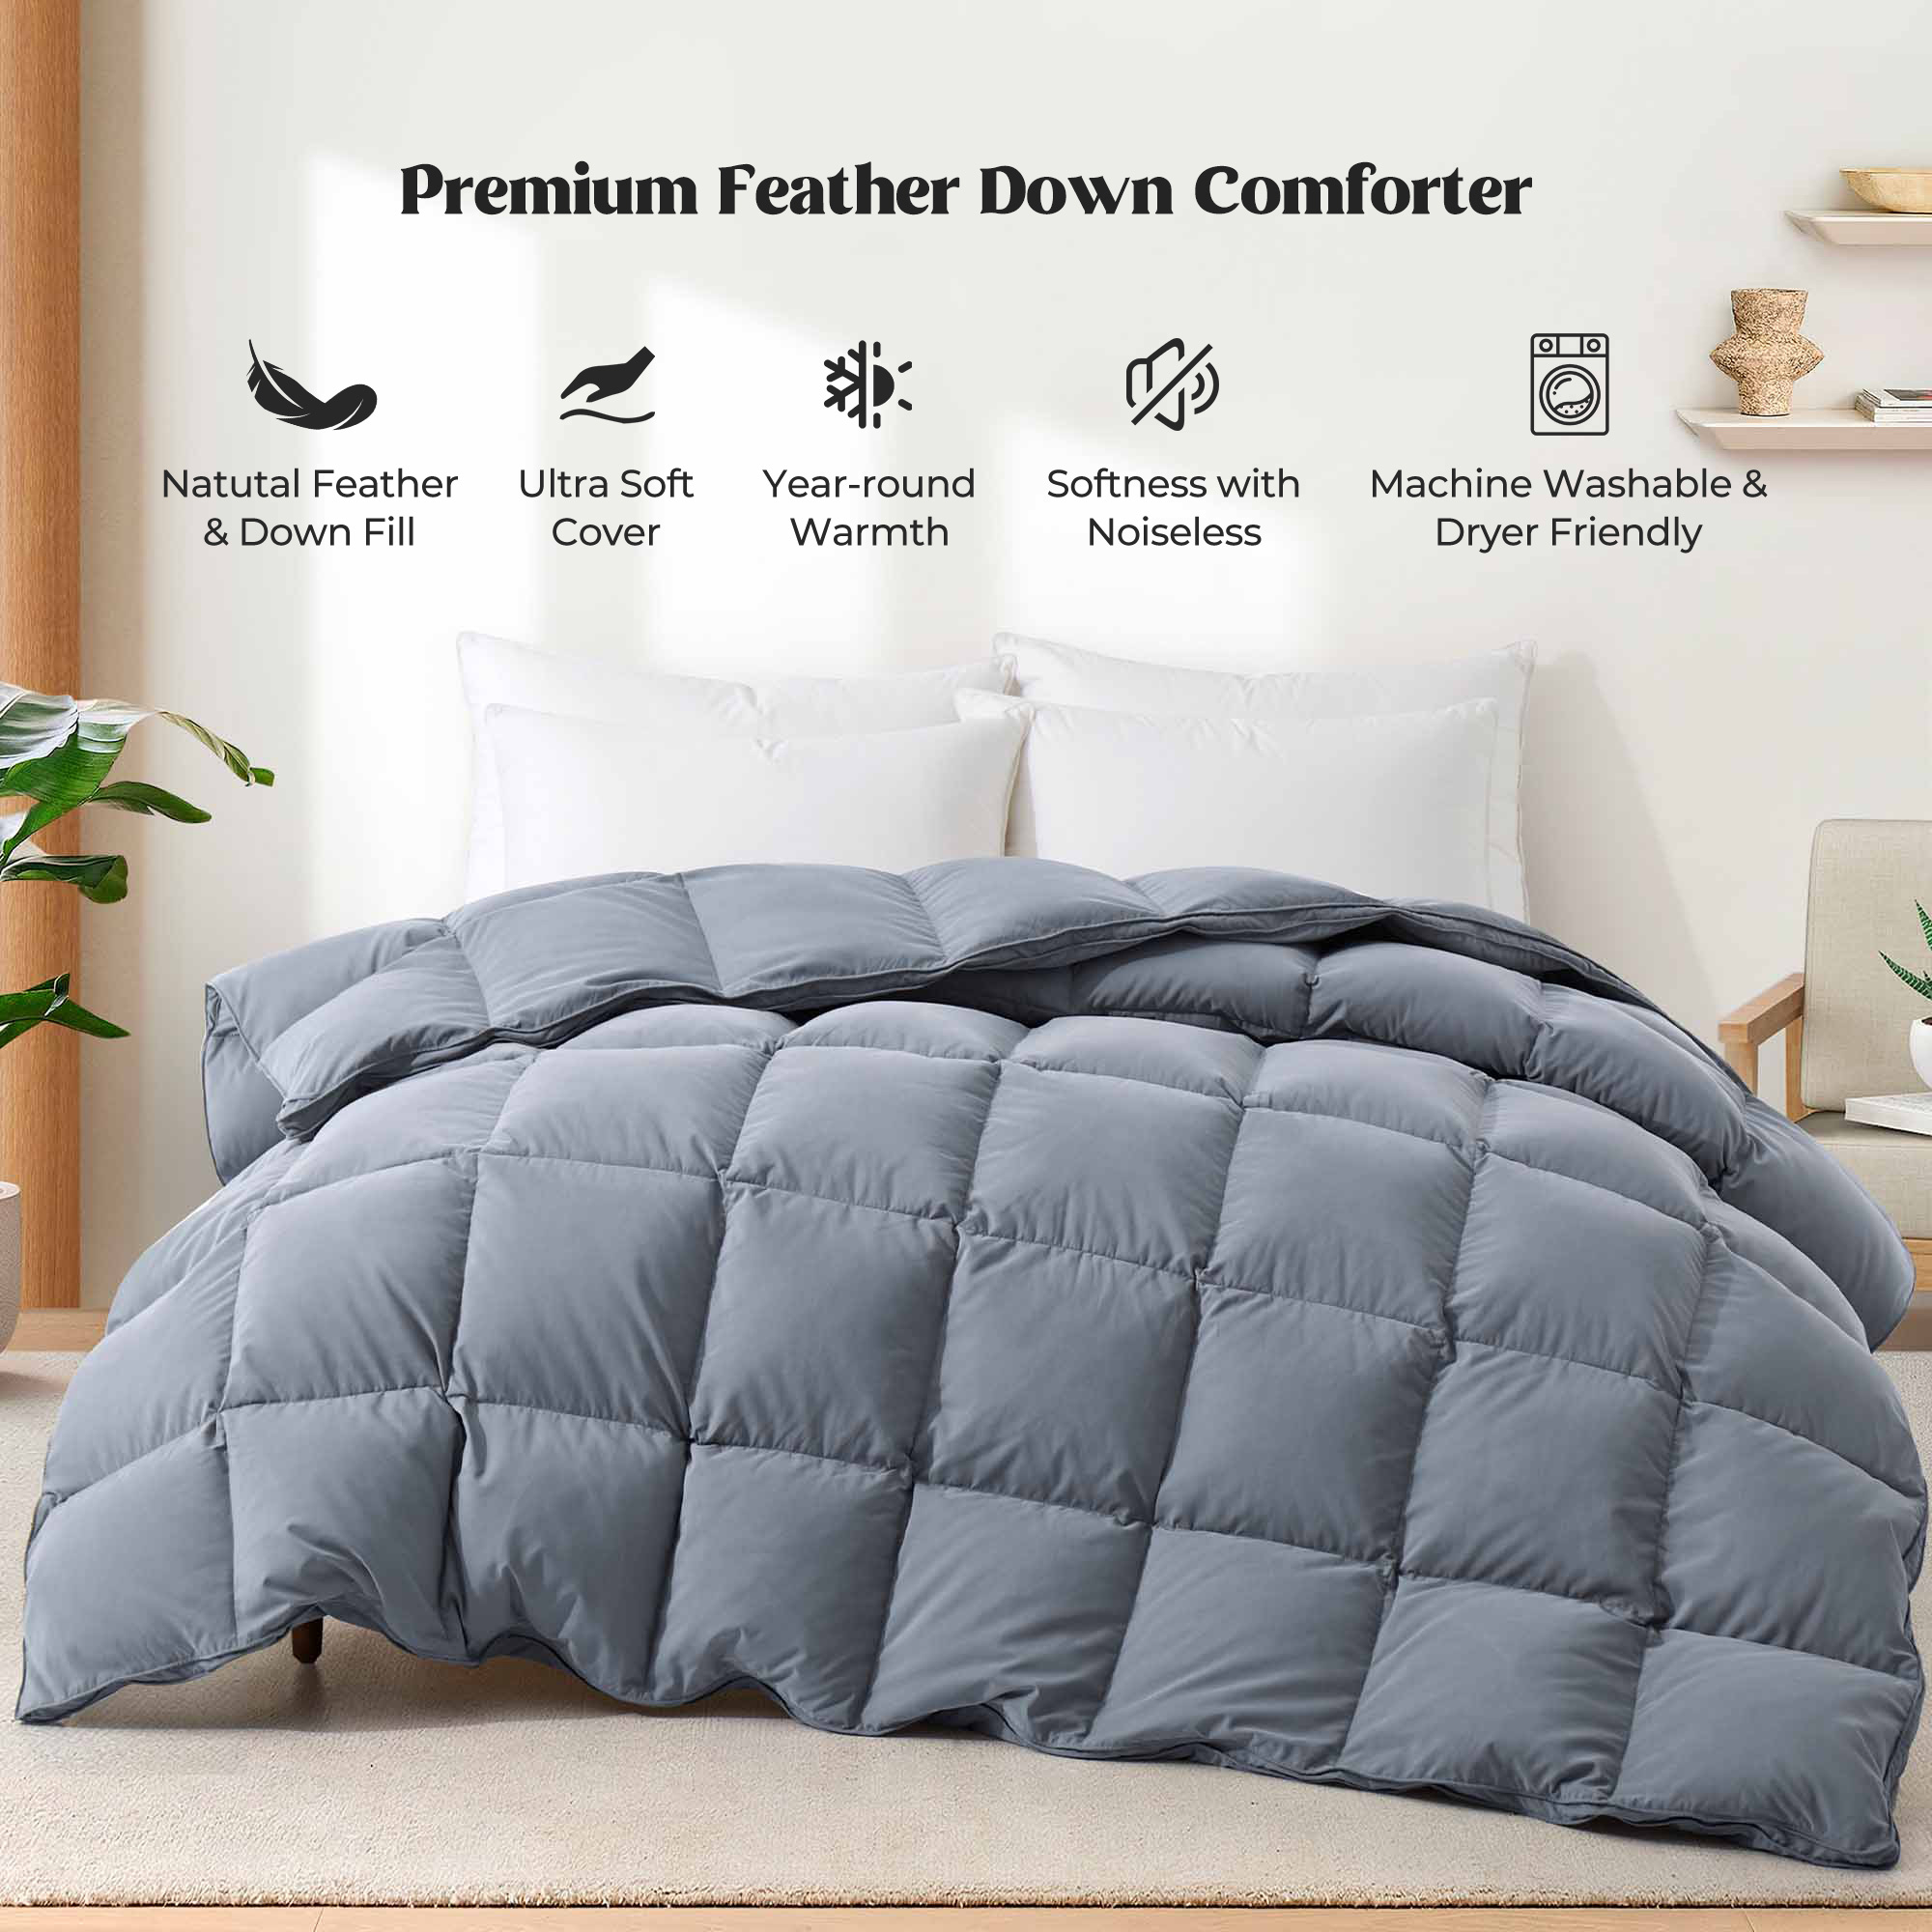 Medium Weight Goose Feather And Down Comforter - White, California King